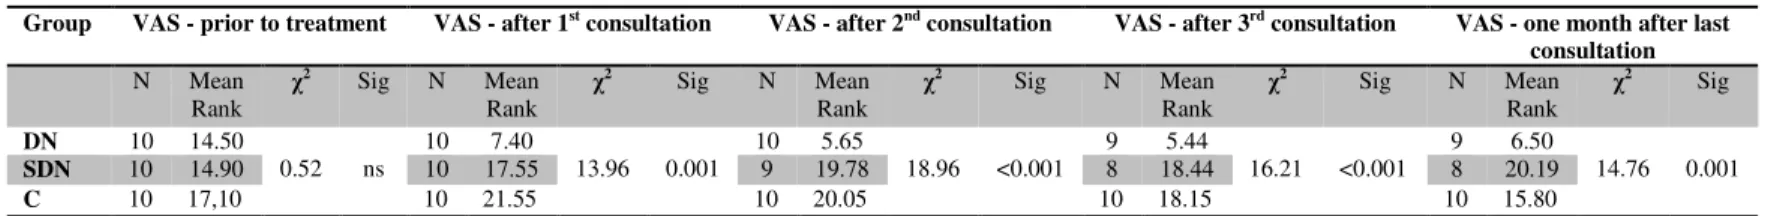 Table 4 - Kruskal-Wallis test for comparison between groups for the VAS scores in the different moments of evaluation 